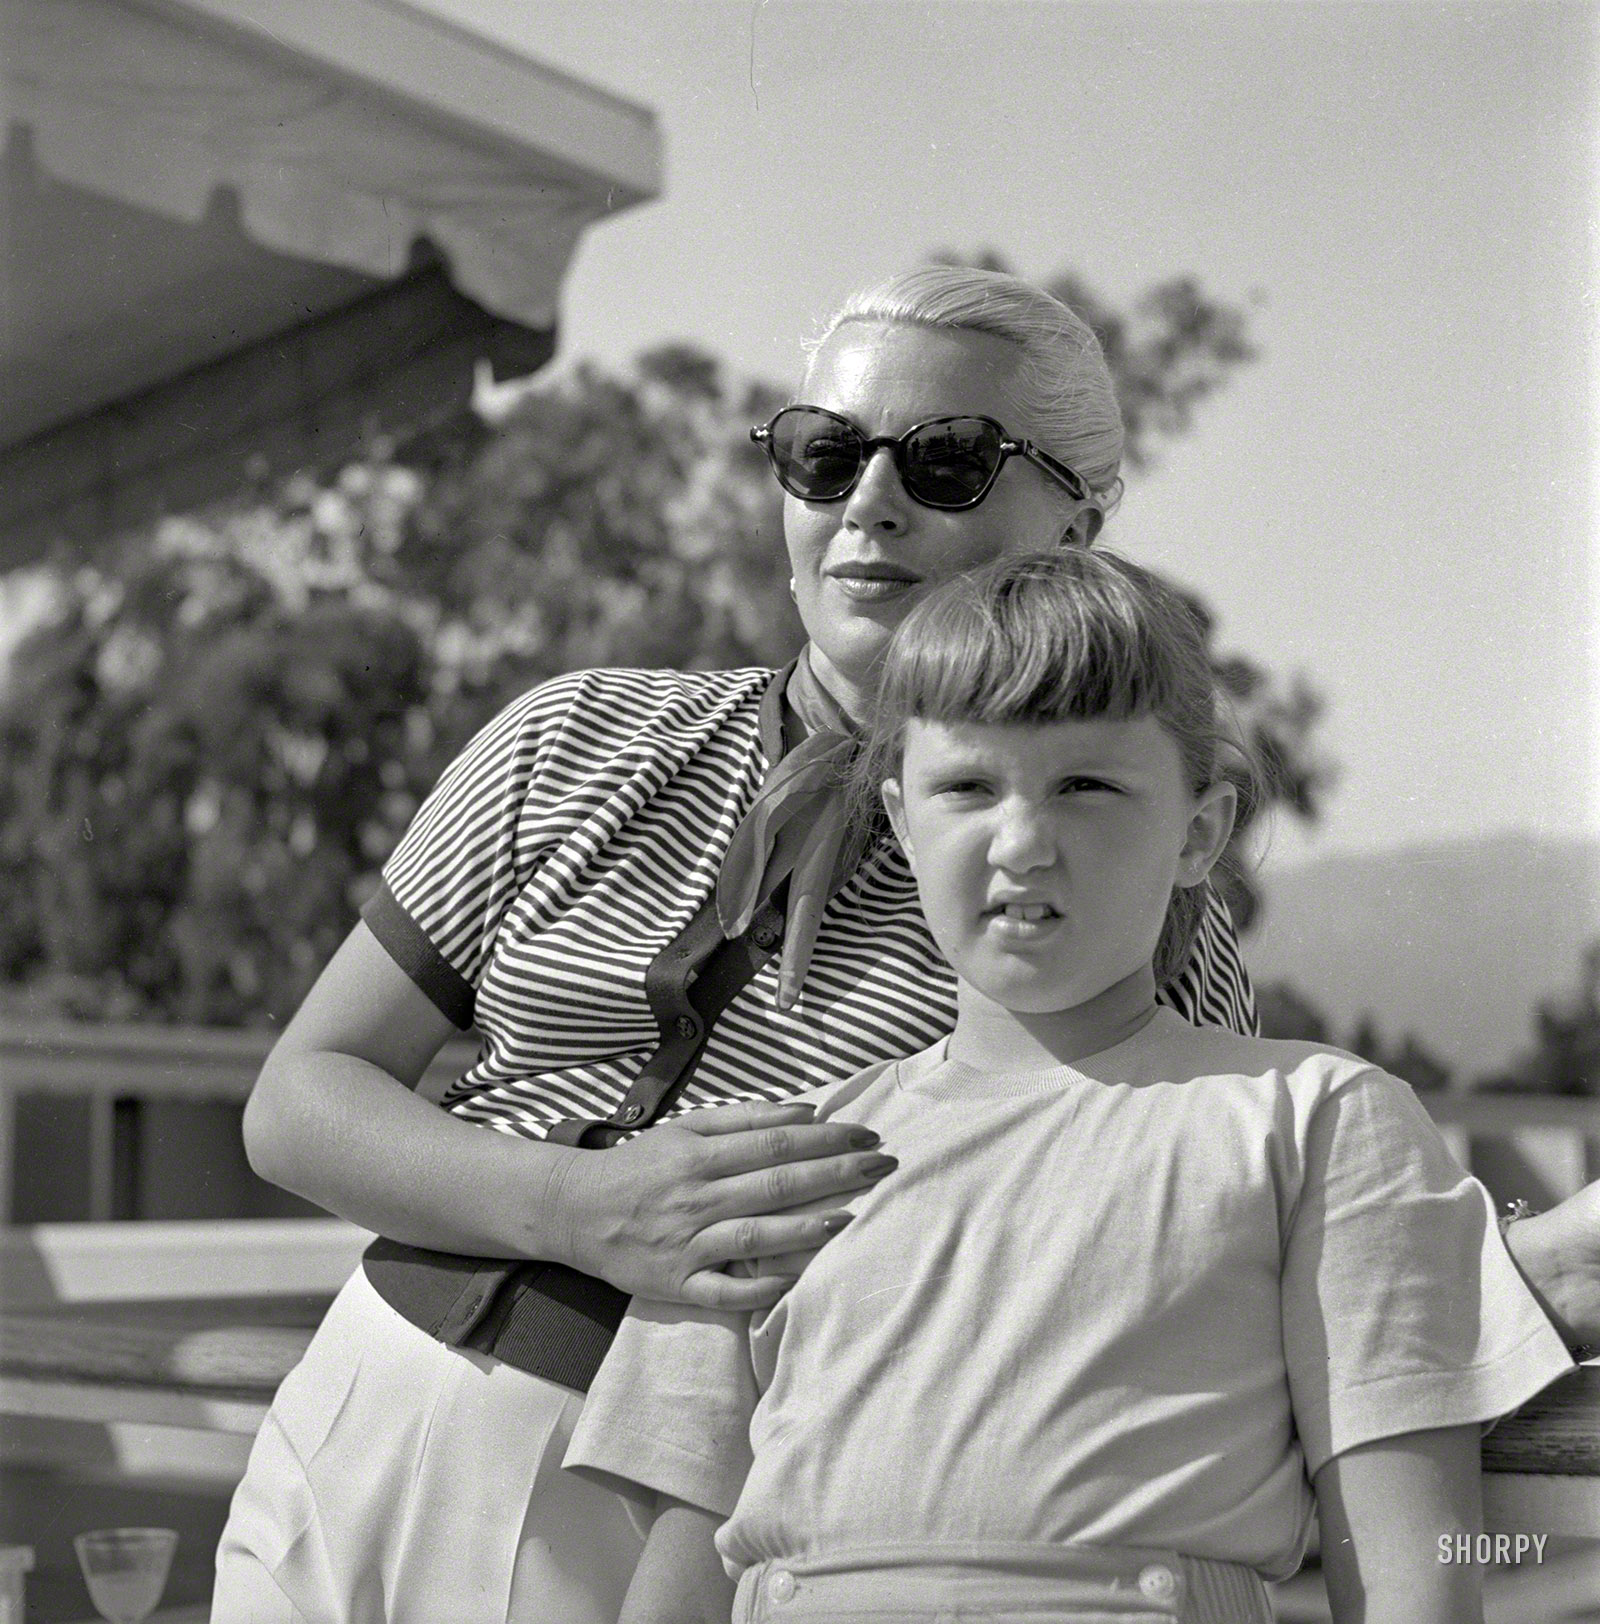 Santa Barbara, 1951. "Actress Lana Turner and daughter Cheryl Crane." Who, seven years after this picture was snapped, had a fatal run-in with her mother's gangster boyfriend. Photo by Earl Theisen for Look magazine. View full size.